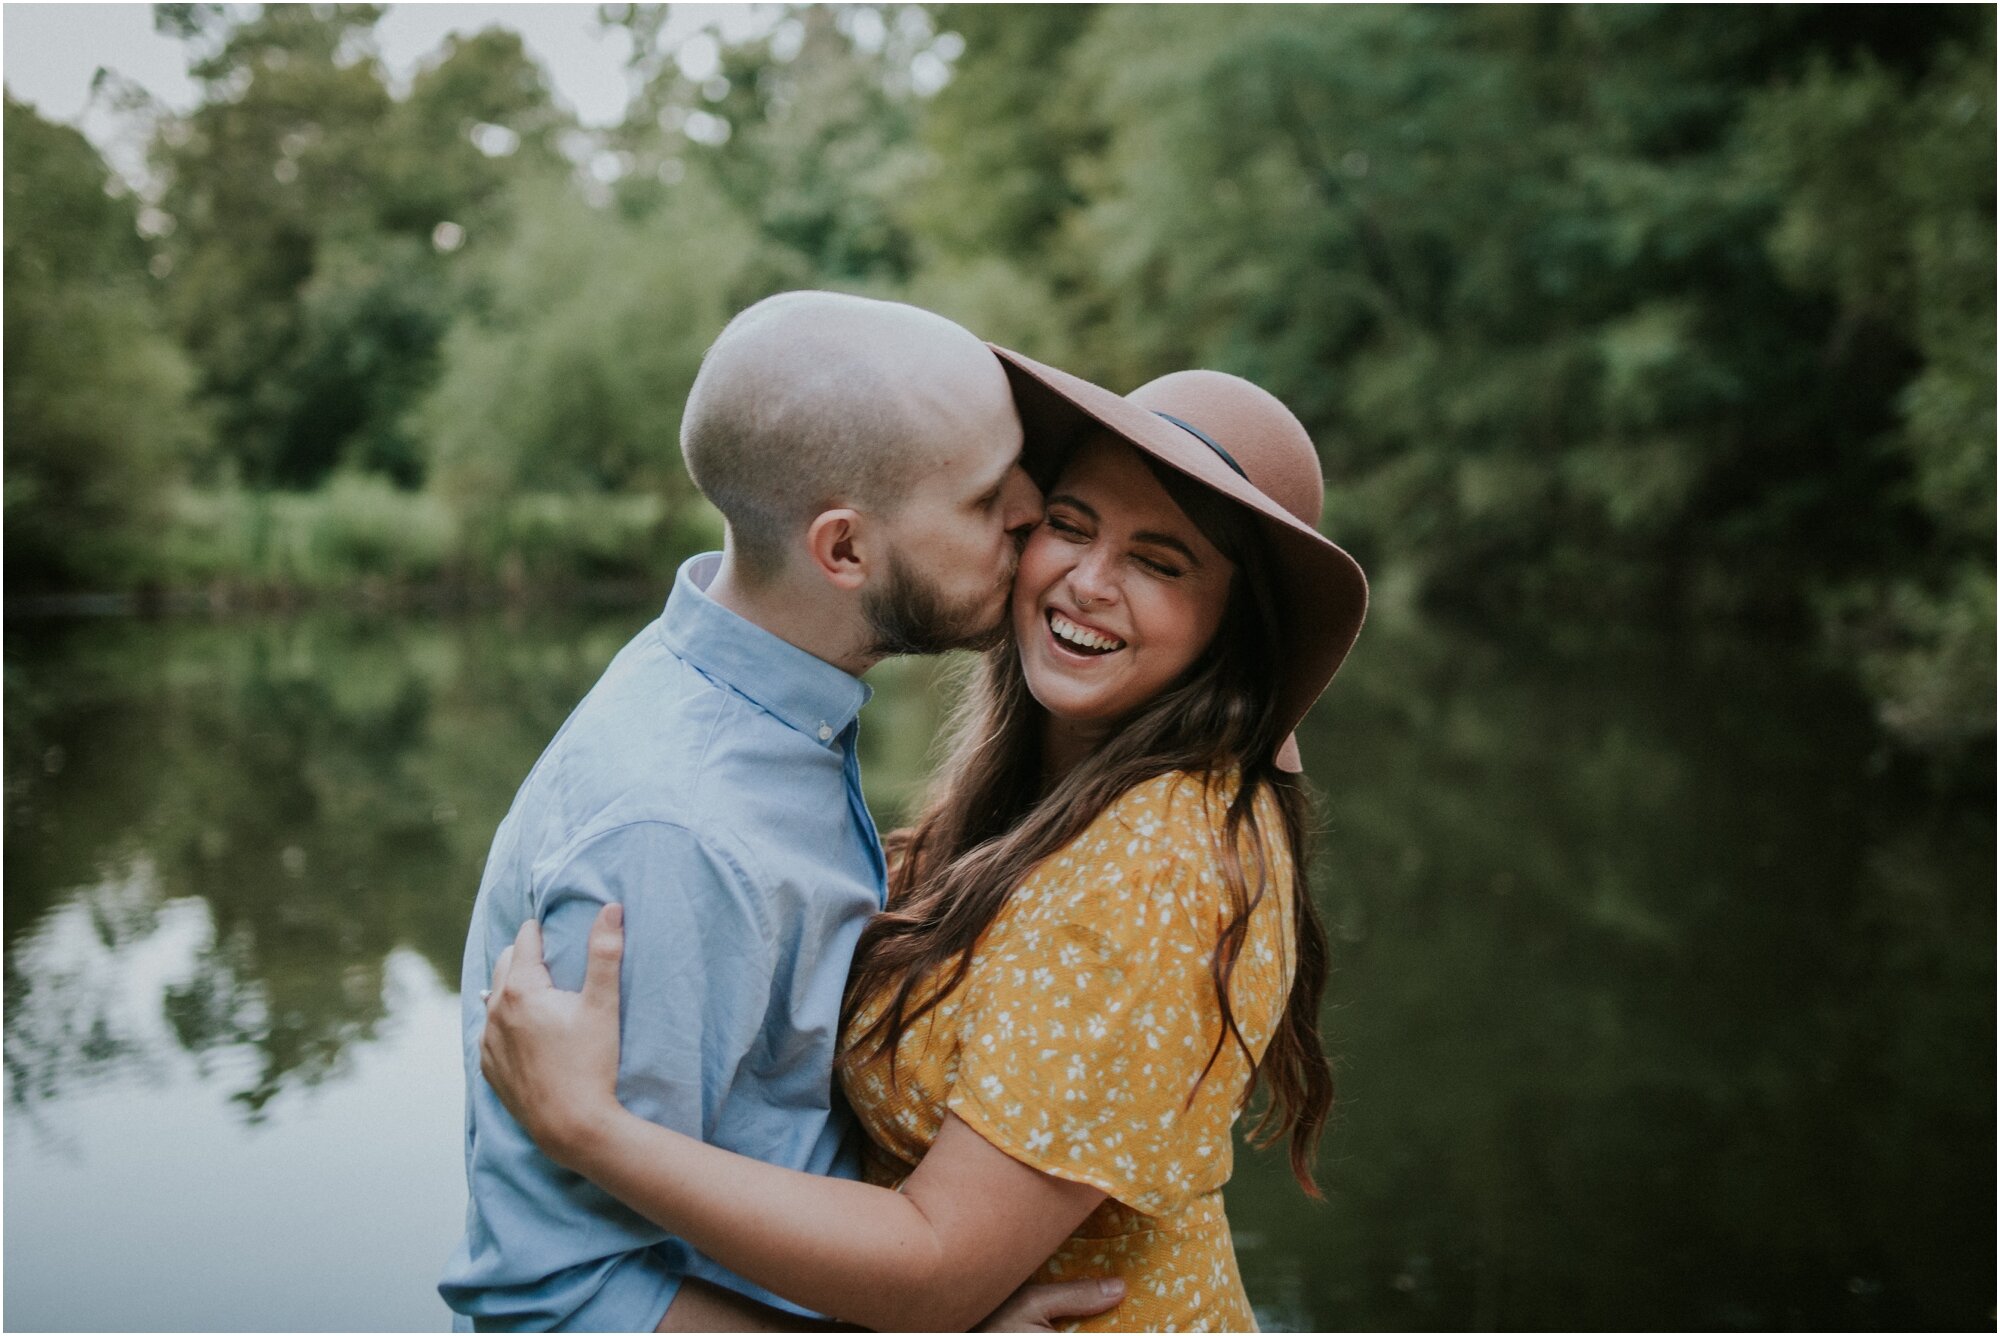 kingsport-tennessee-backyard-pond-bays-mountain-summer-engagement-session_0039.jpg